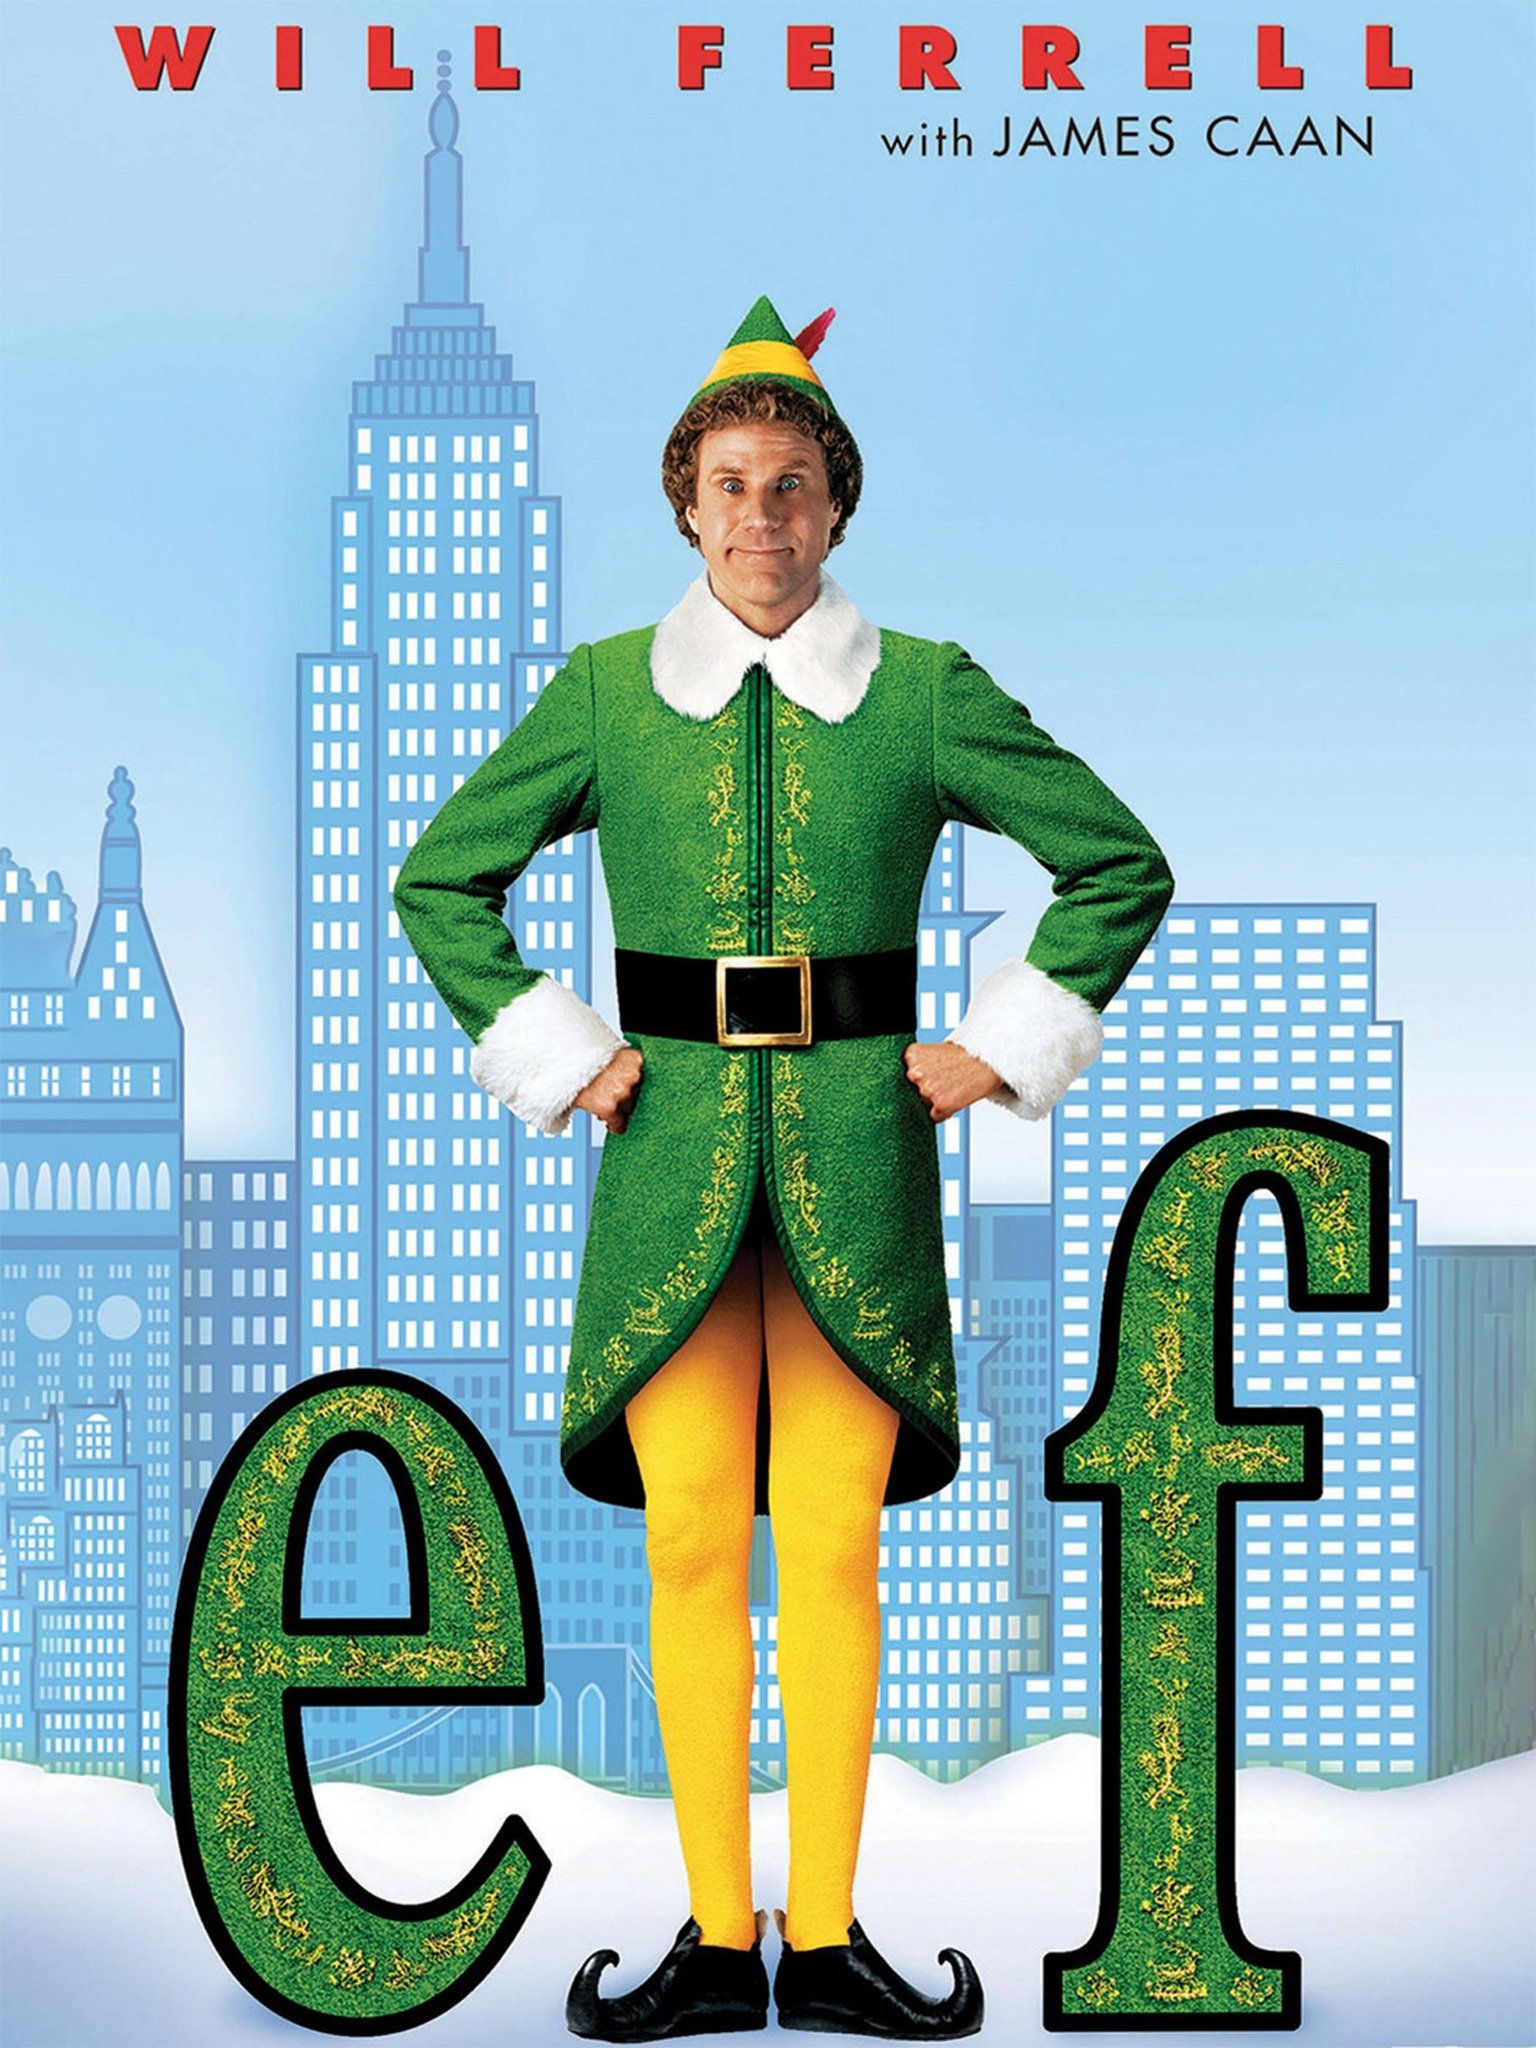 Nebraska Unions will show the winter comedy film ELF at its Free Movie Night for UNL students on Dec. 10, 2021.